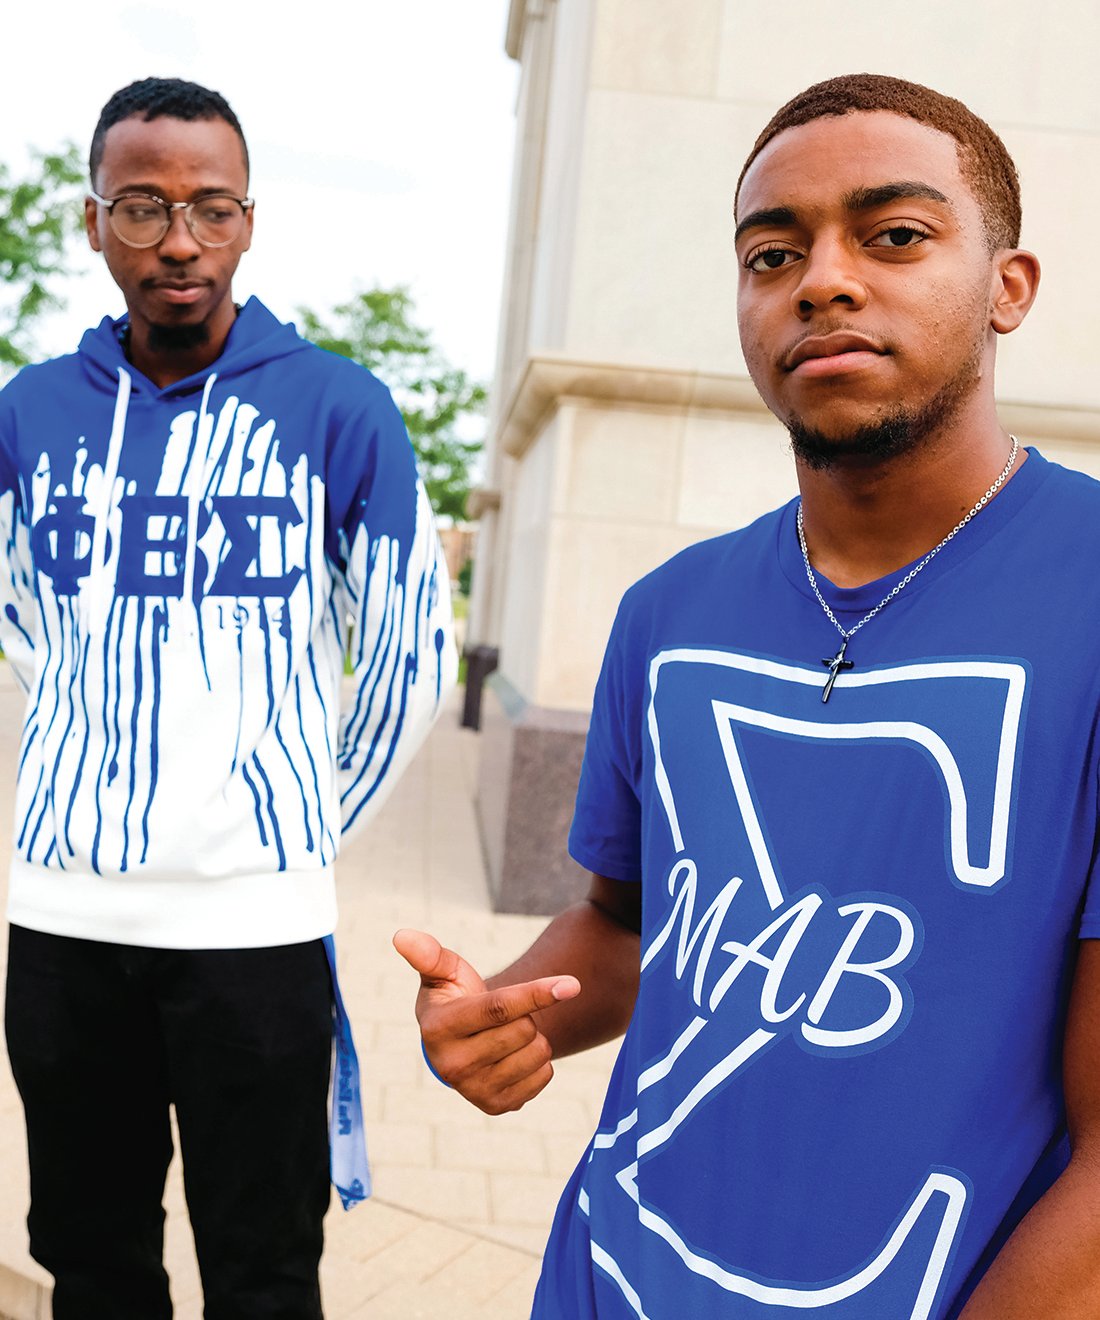 Two members of Phi Beta Sigma, one looking down and one looking directly at the camera